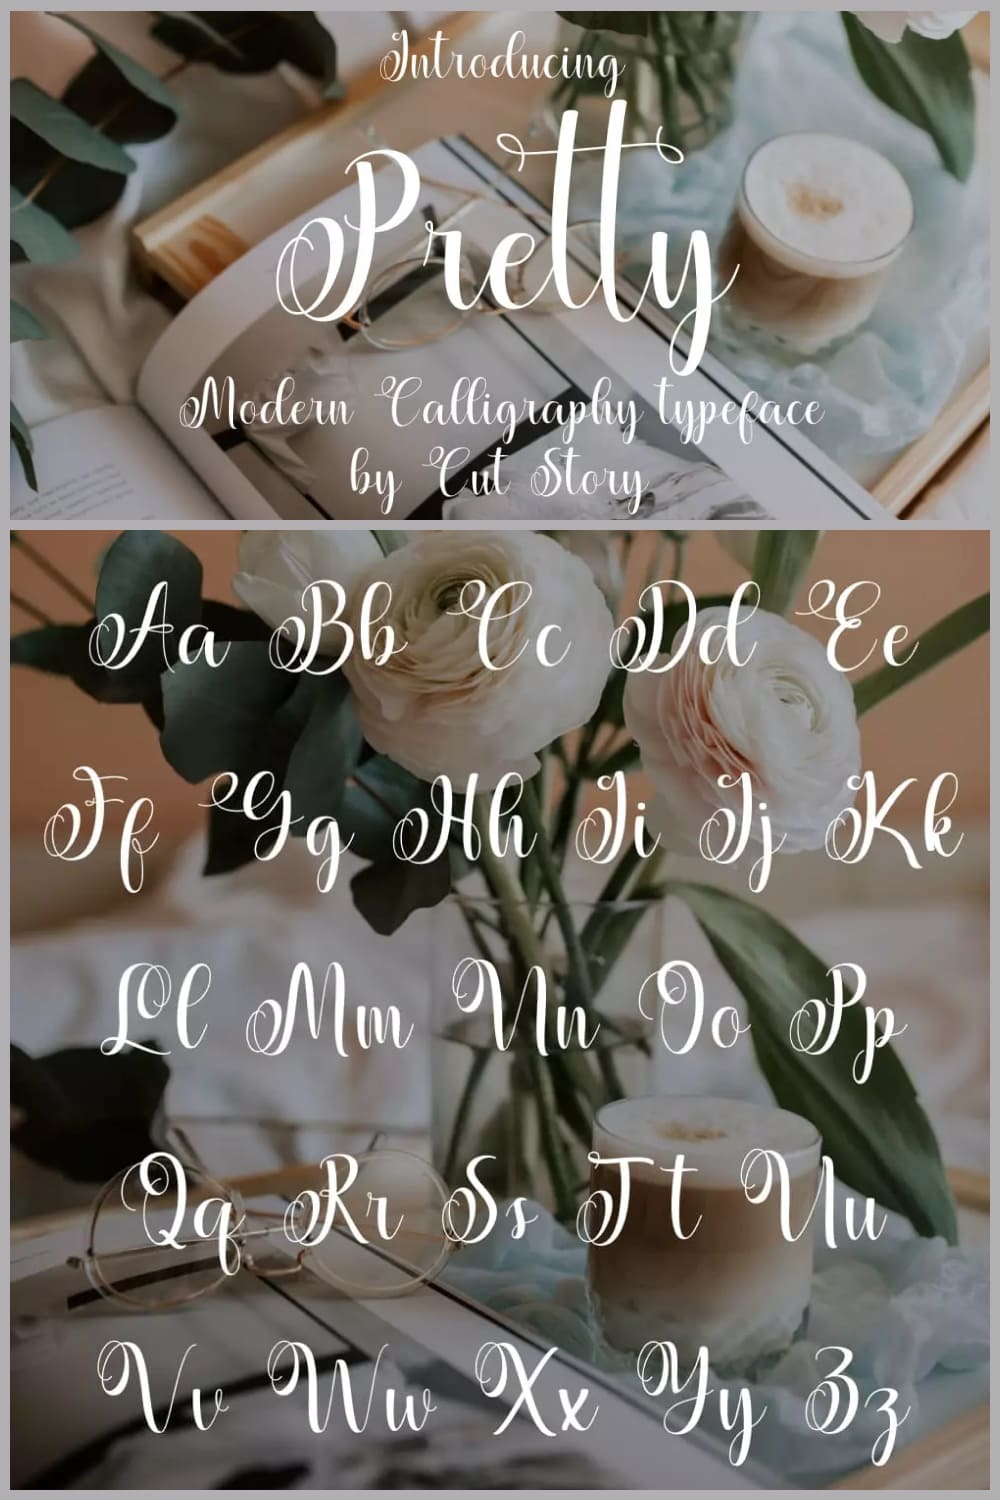 White text on the background of a bouquet of flowers.